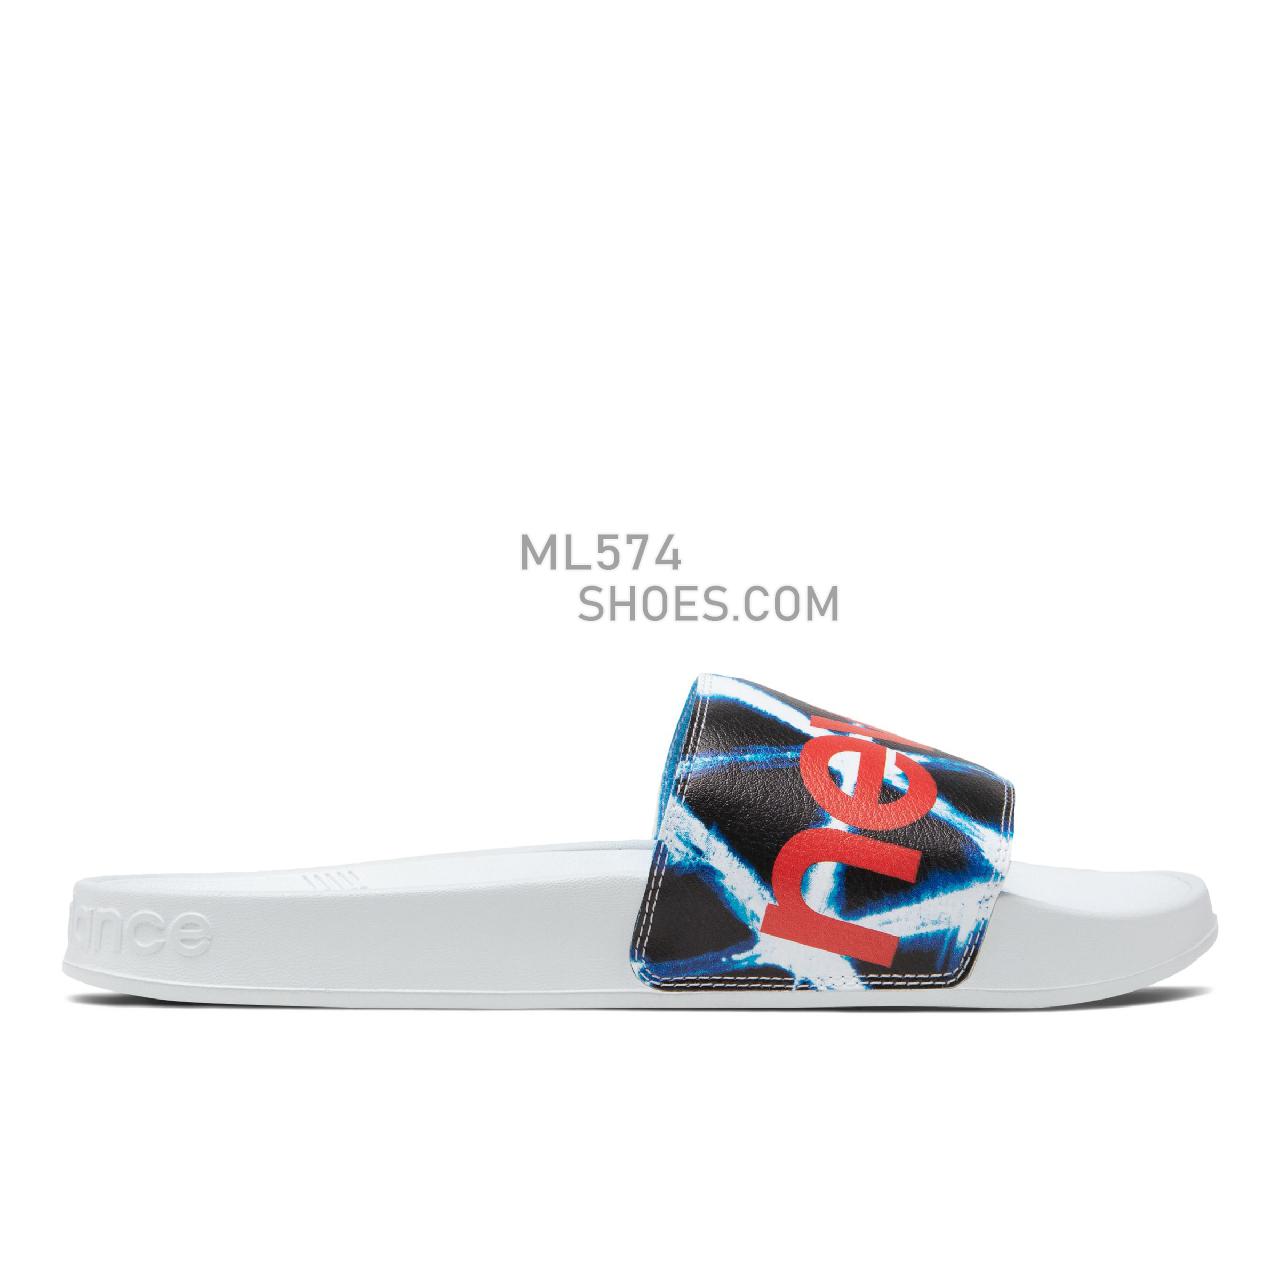 New Balance 200 - Men's Sandals - White with Red and Blue - SMF200VP